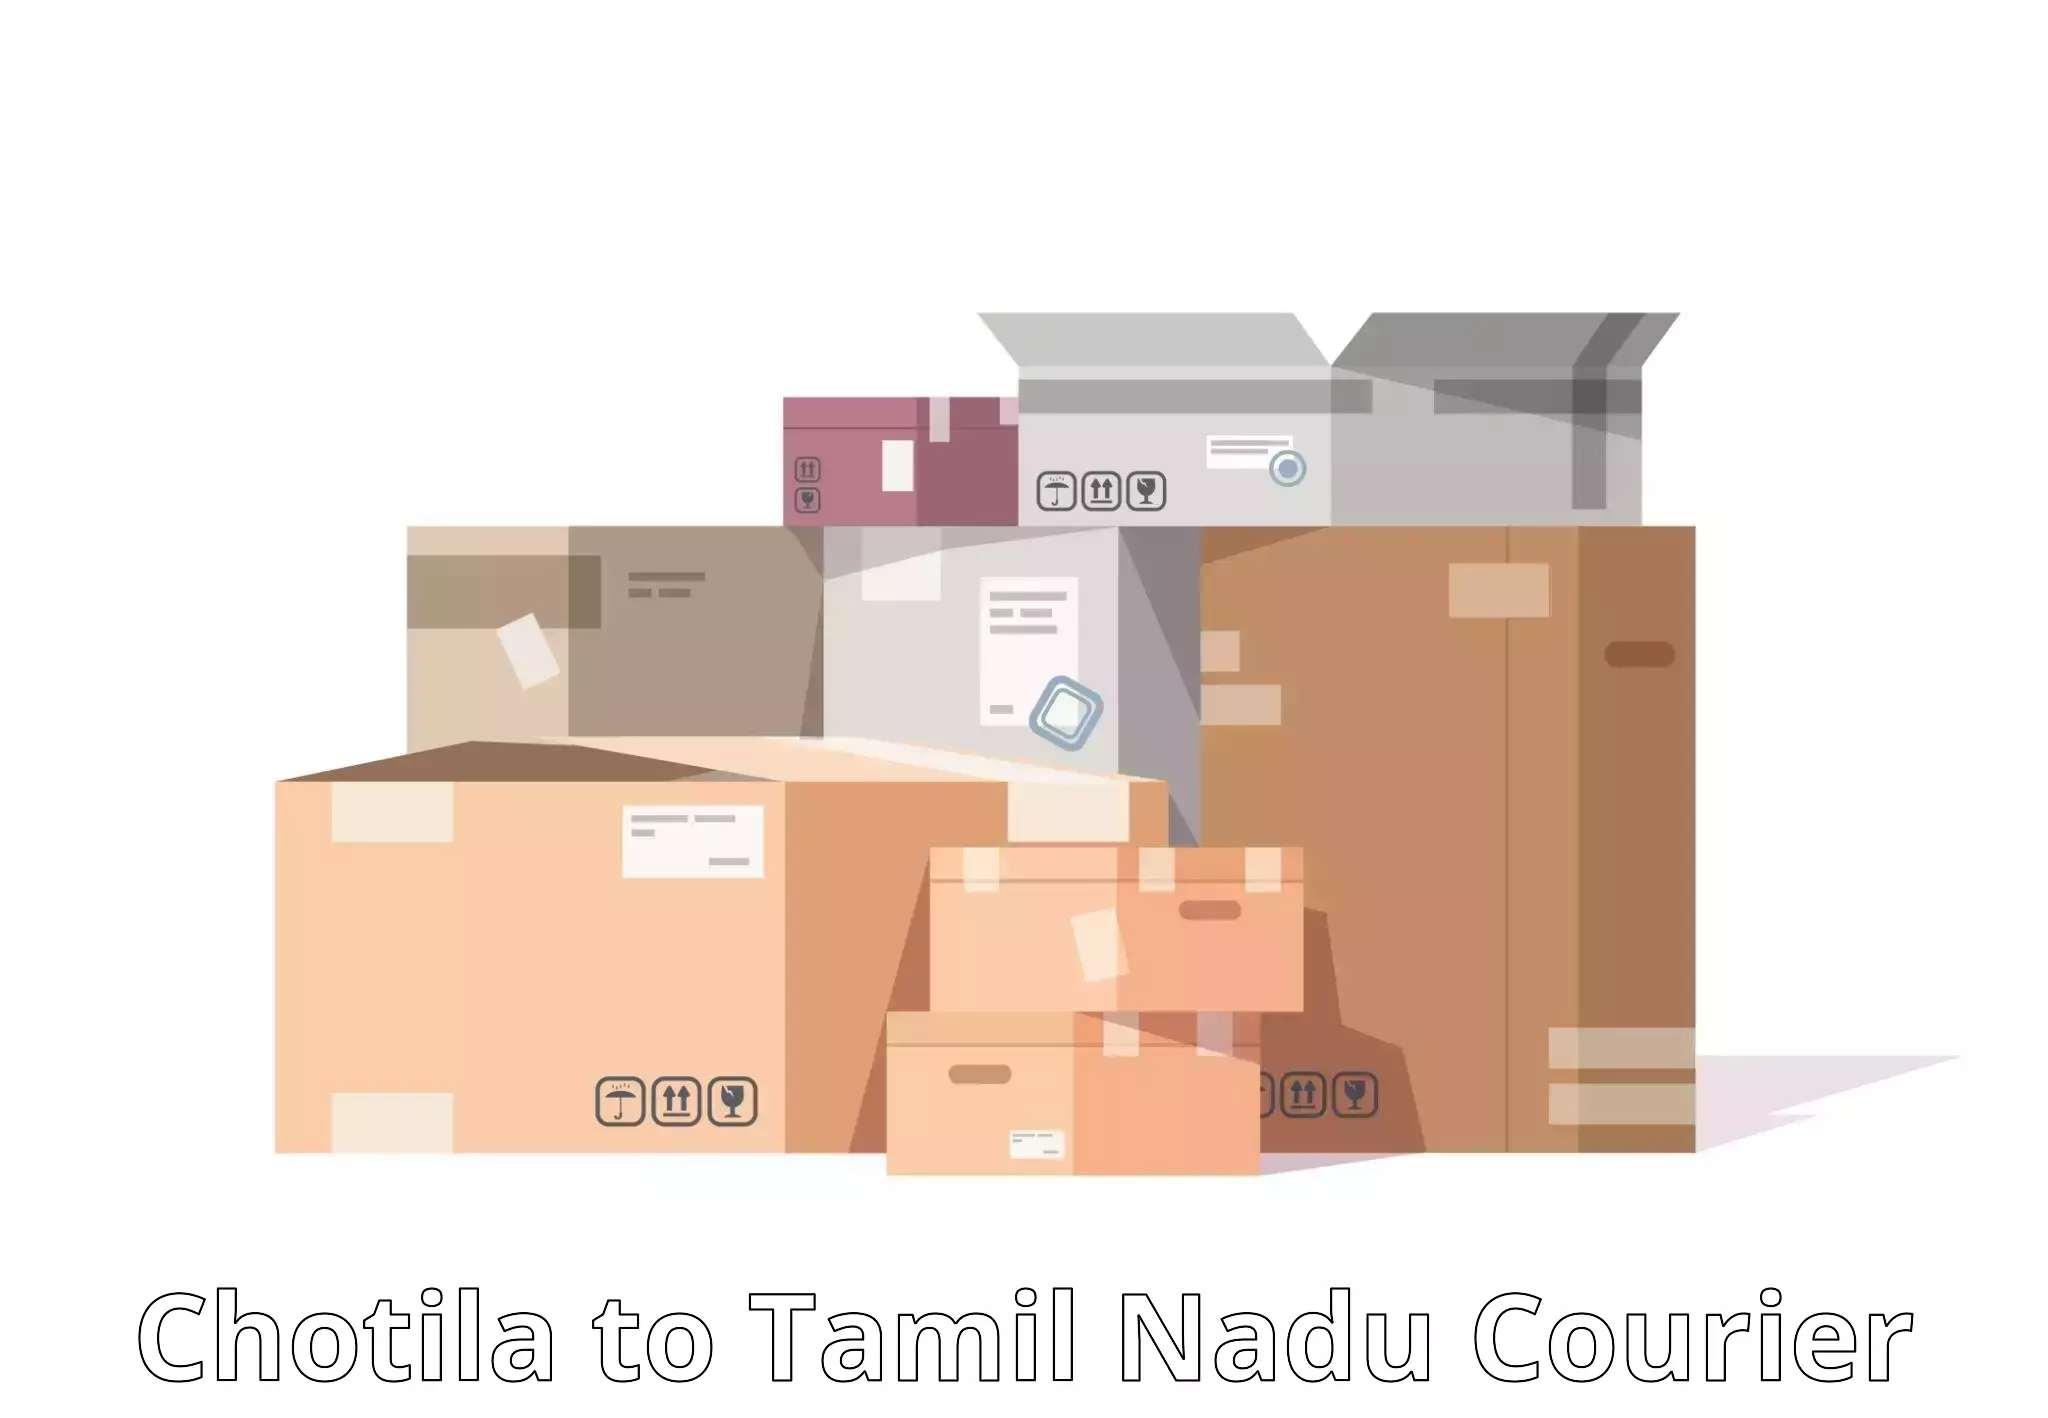 Flexible delivery schedules Chotila to Virudhunagar